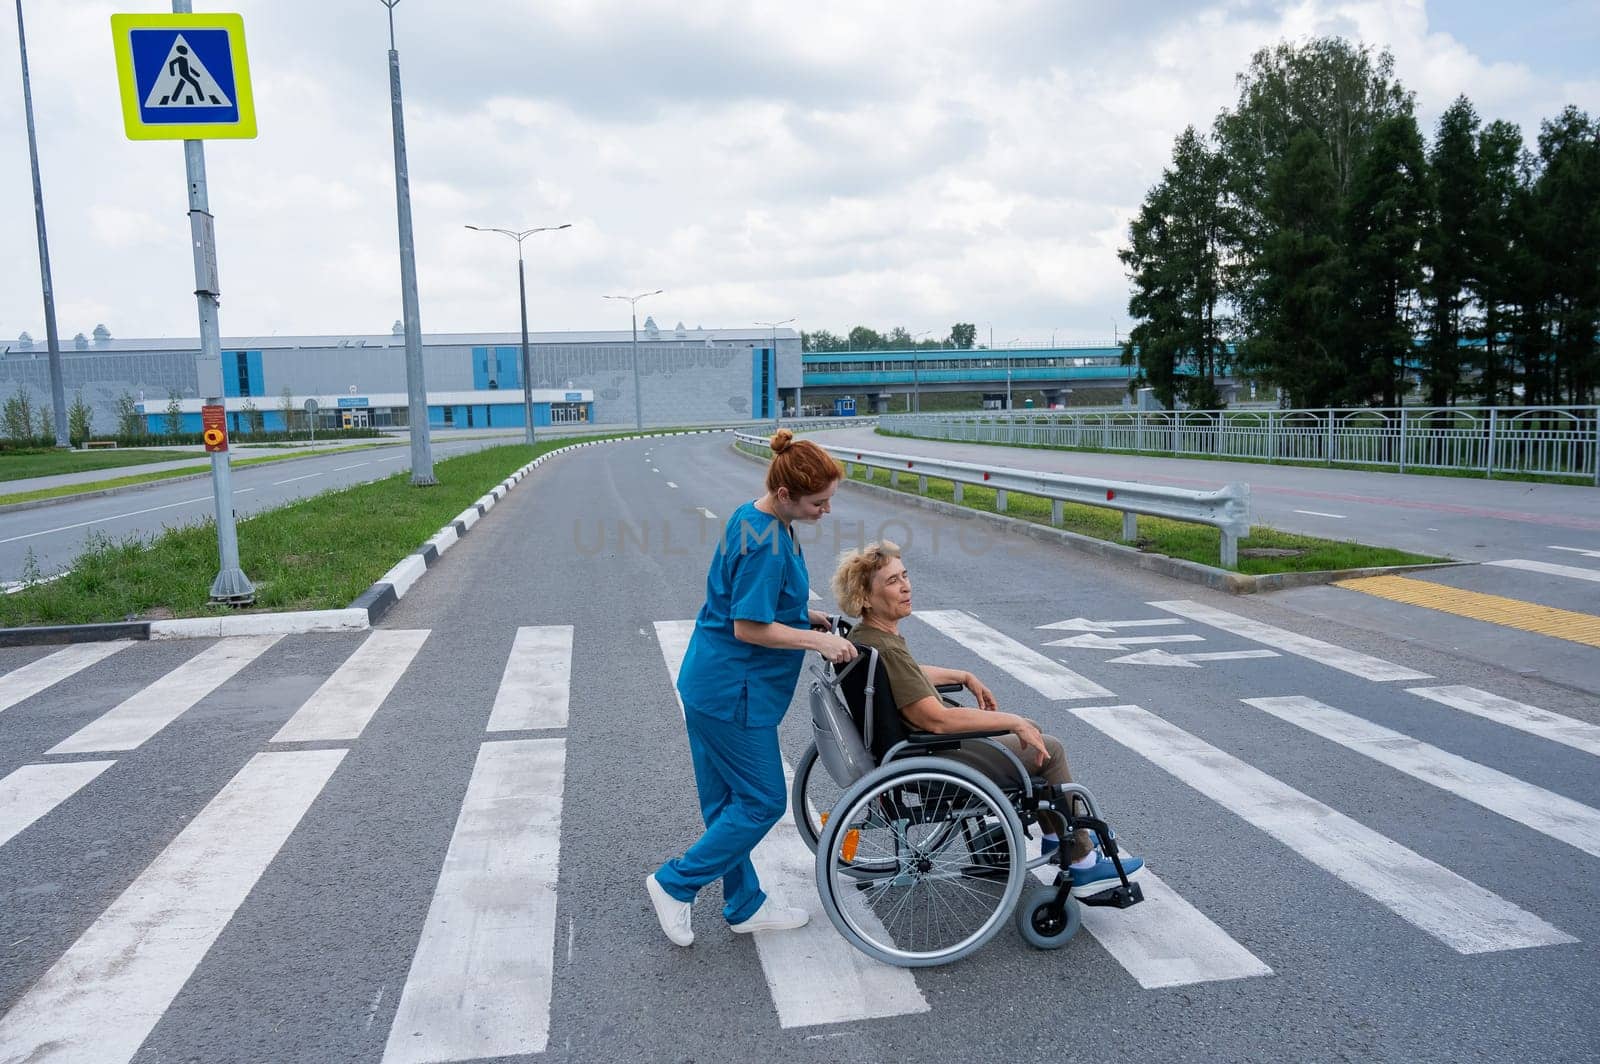 Profile of a nurse helping an elderly woman in a wheelchair cross the road. by mrwed54